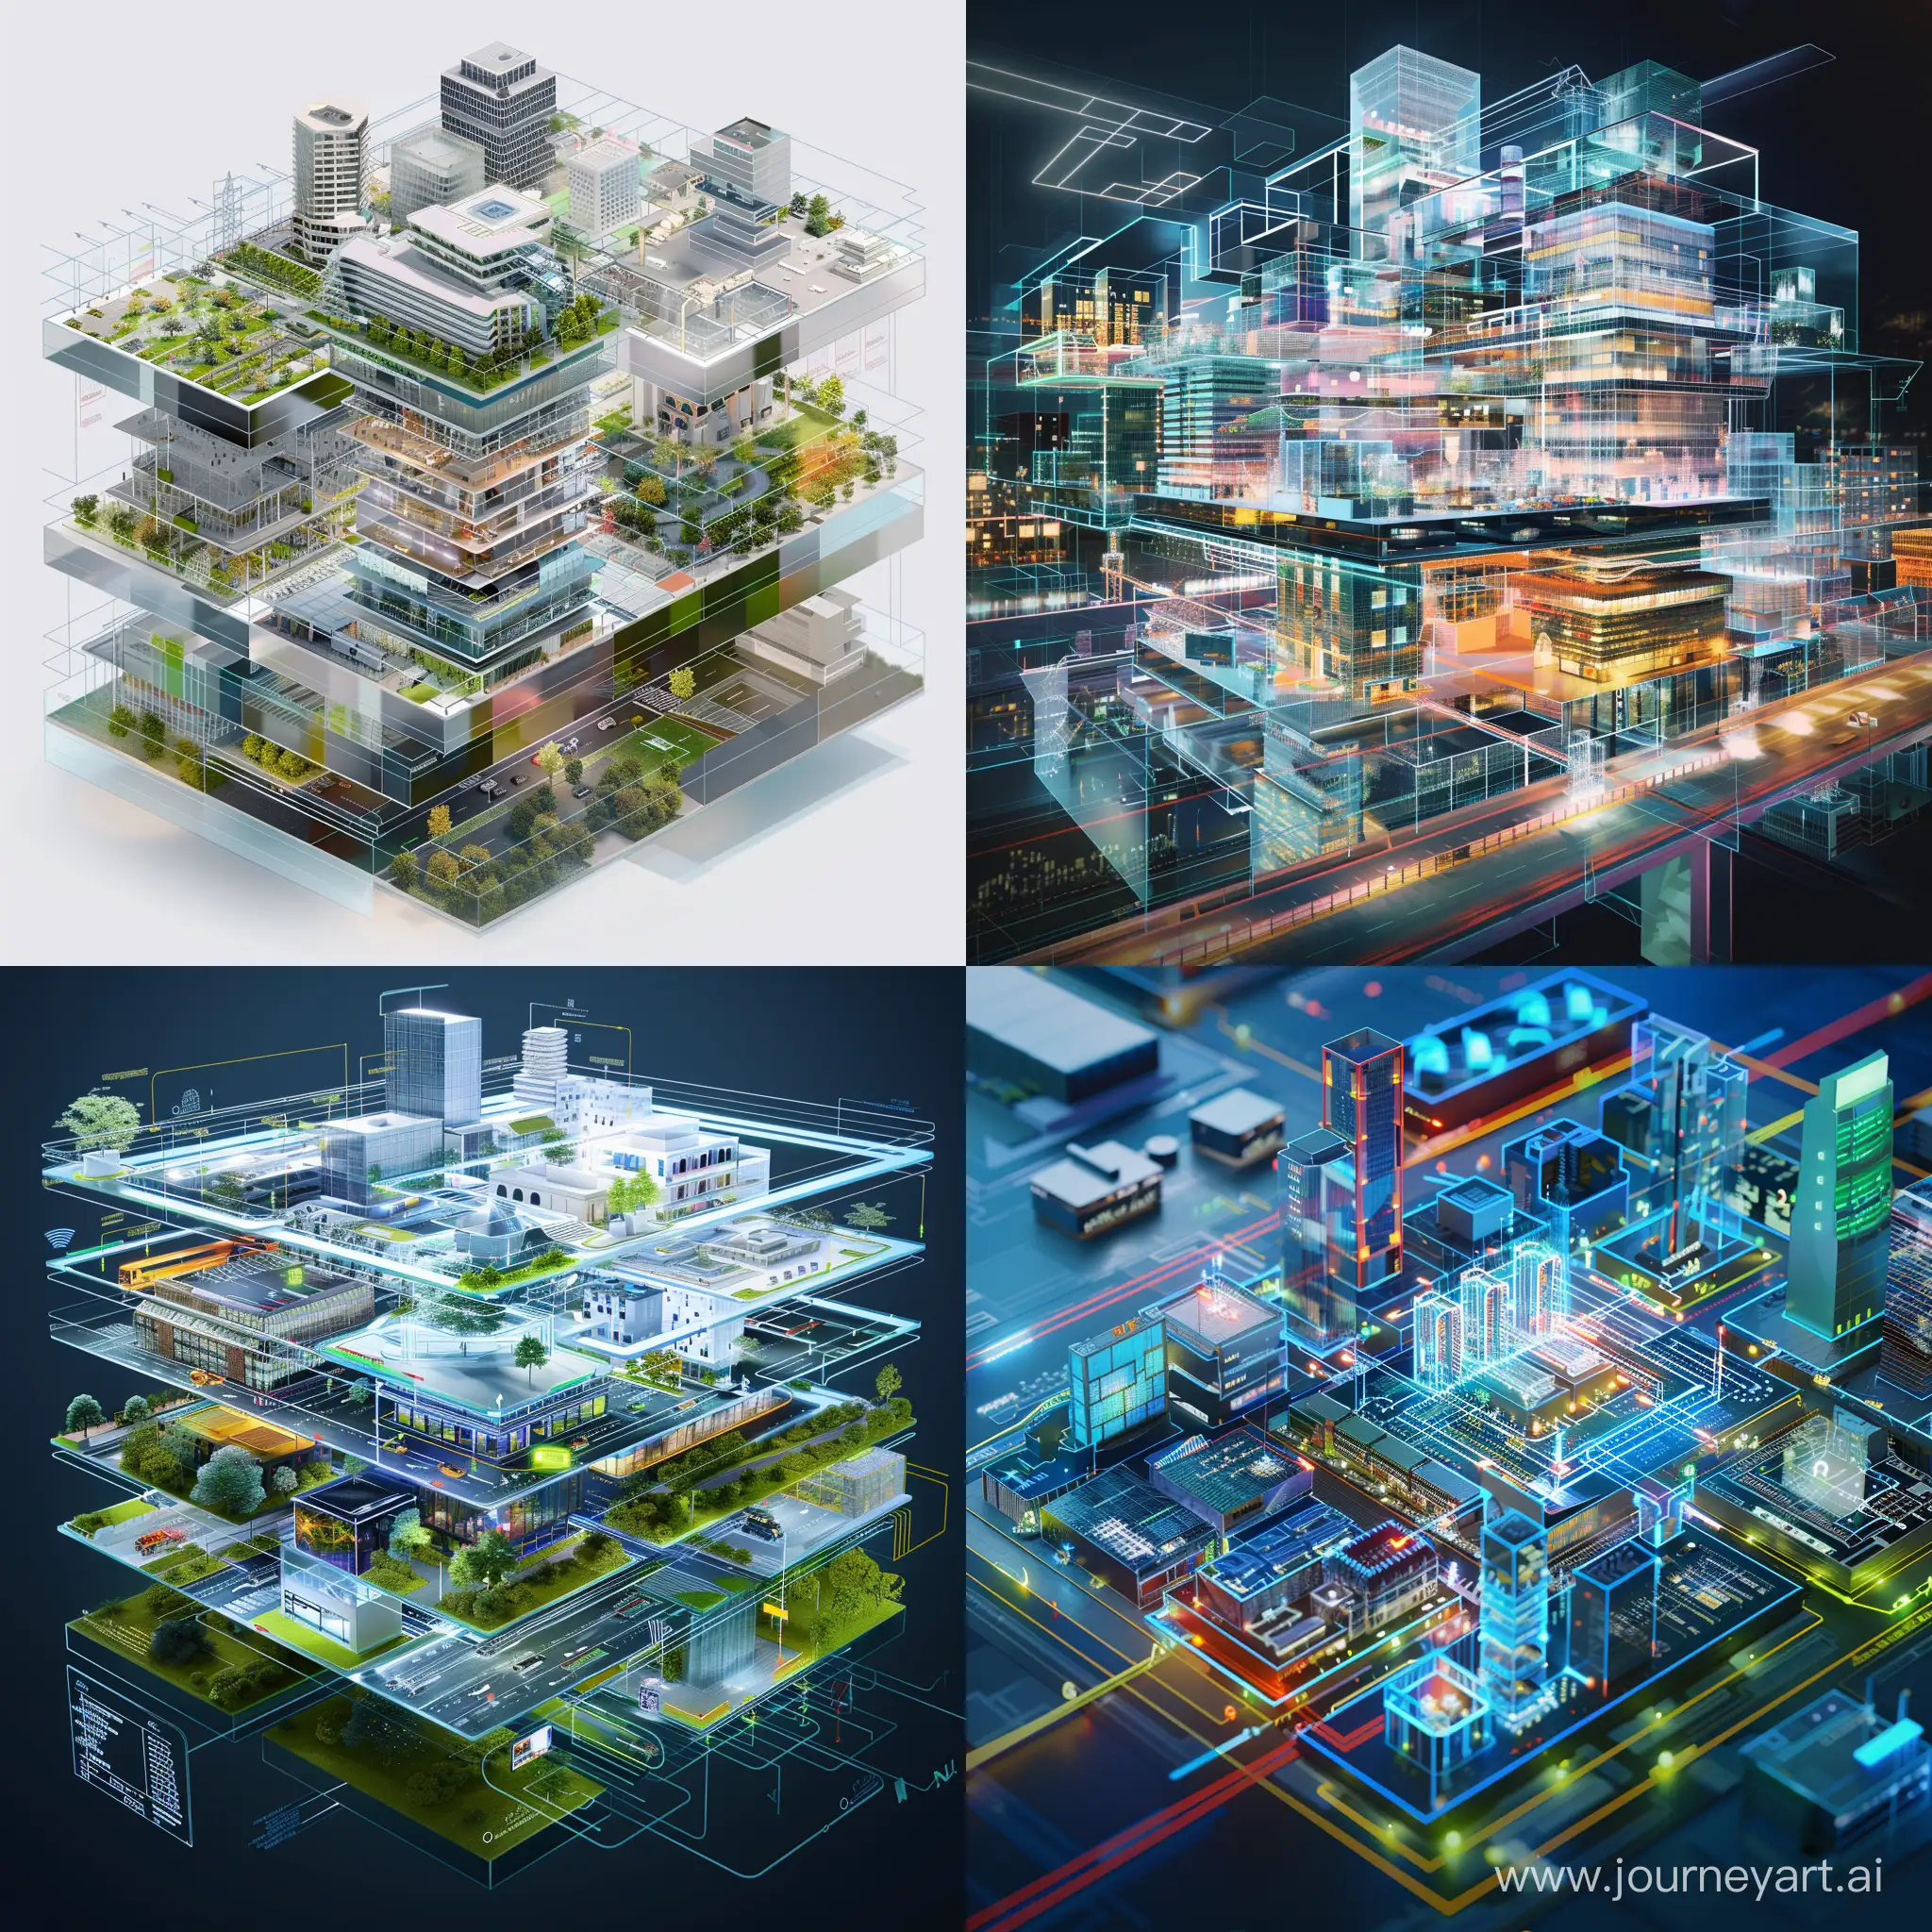 Futuristic-Urban-Landscape-with-Multilayered-City-Elements